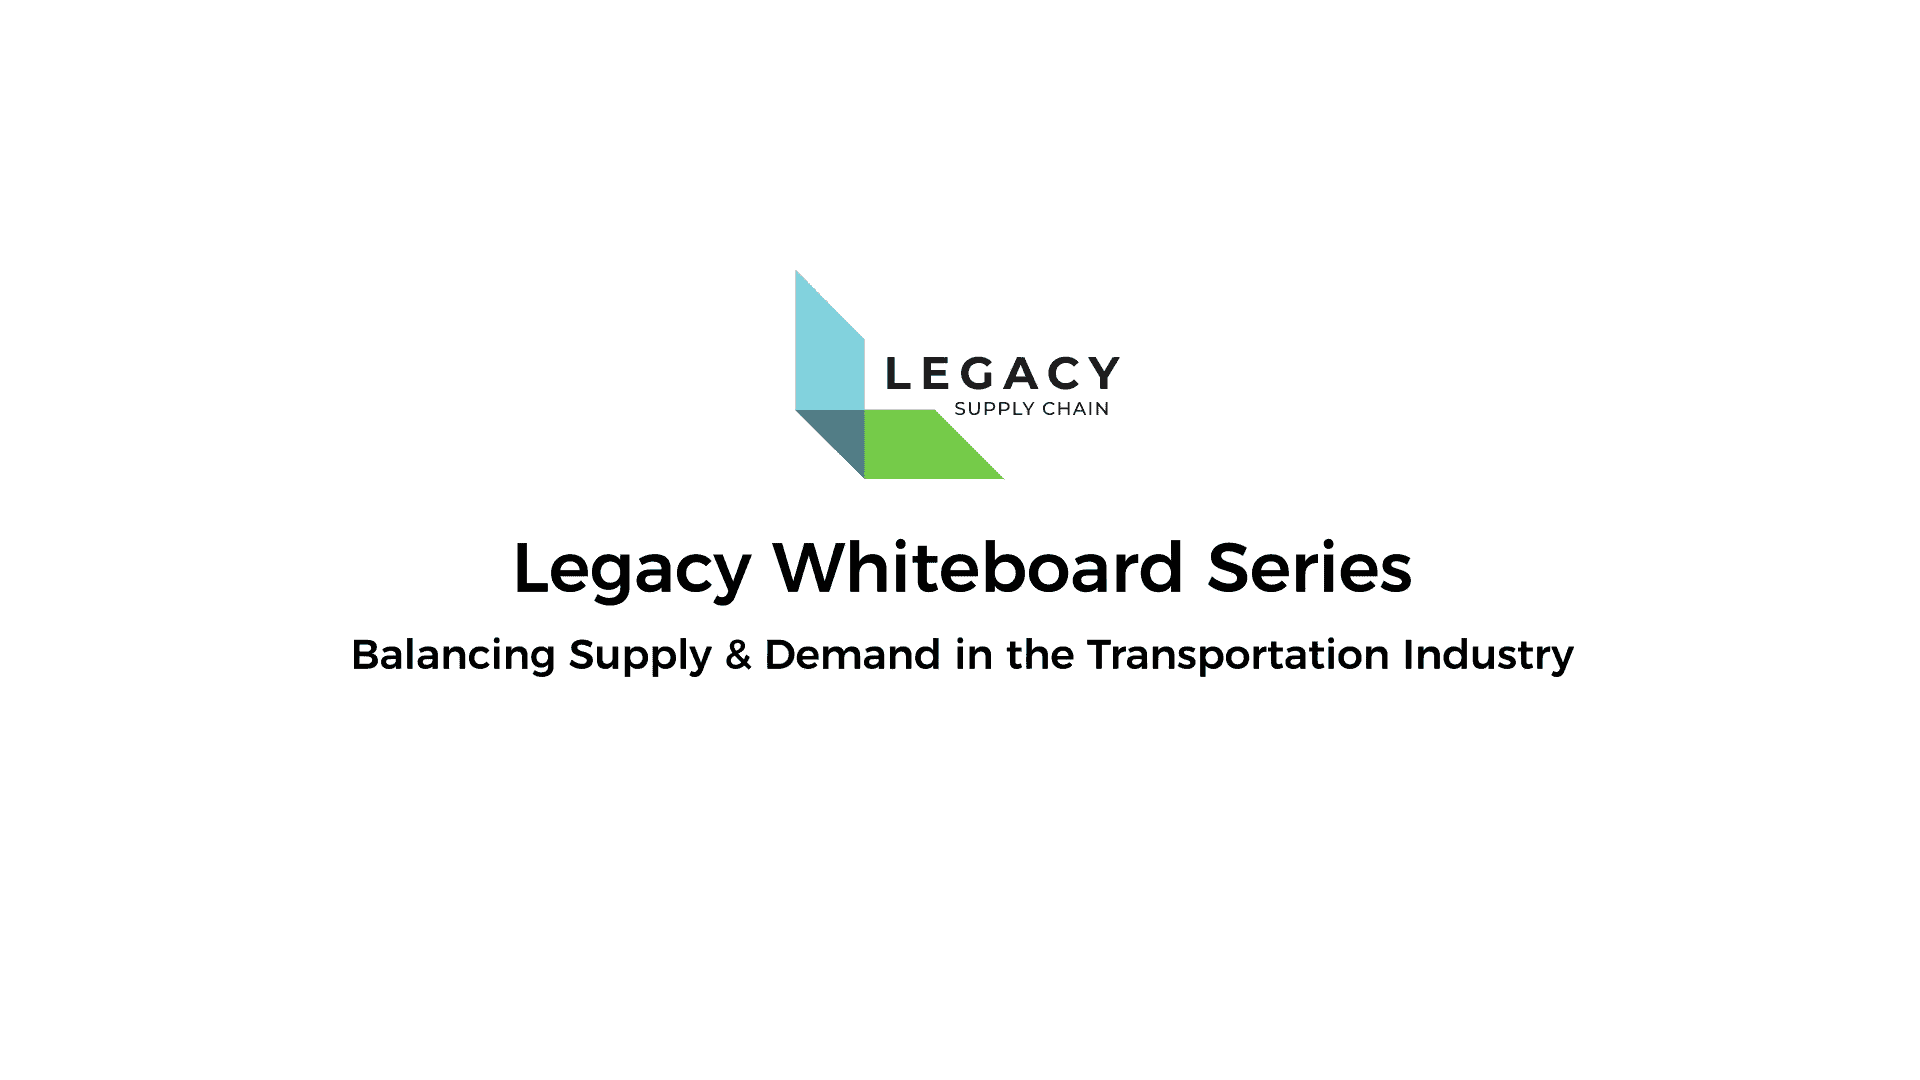 Balancing Supply & Demand in the Transportation Industry